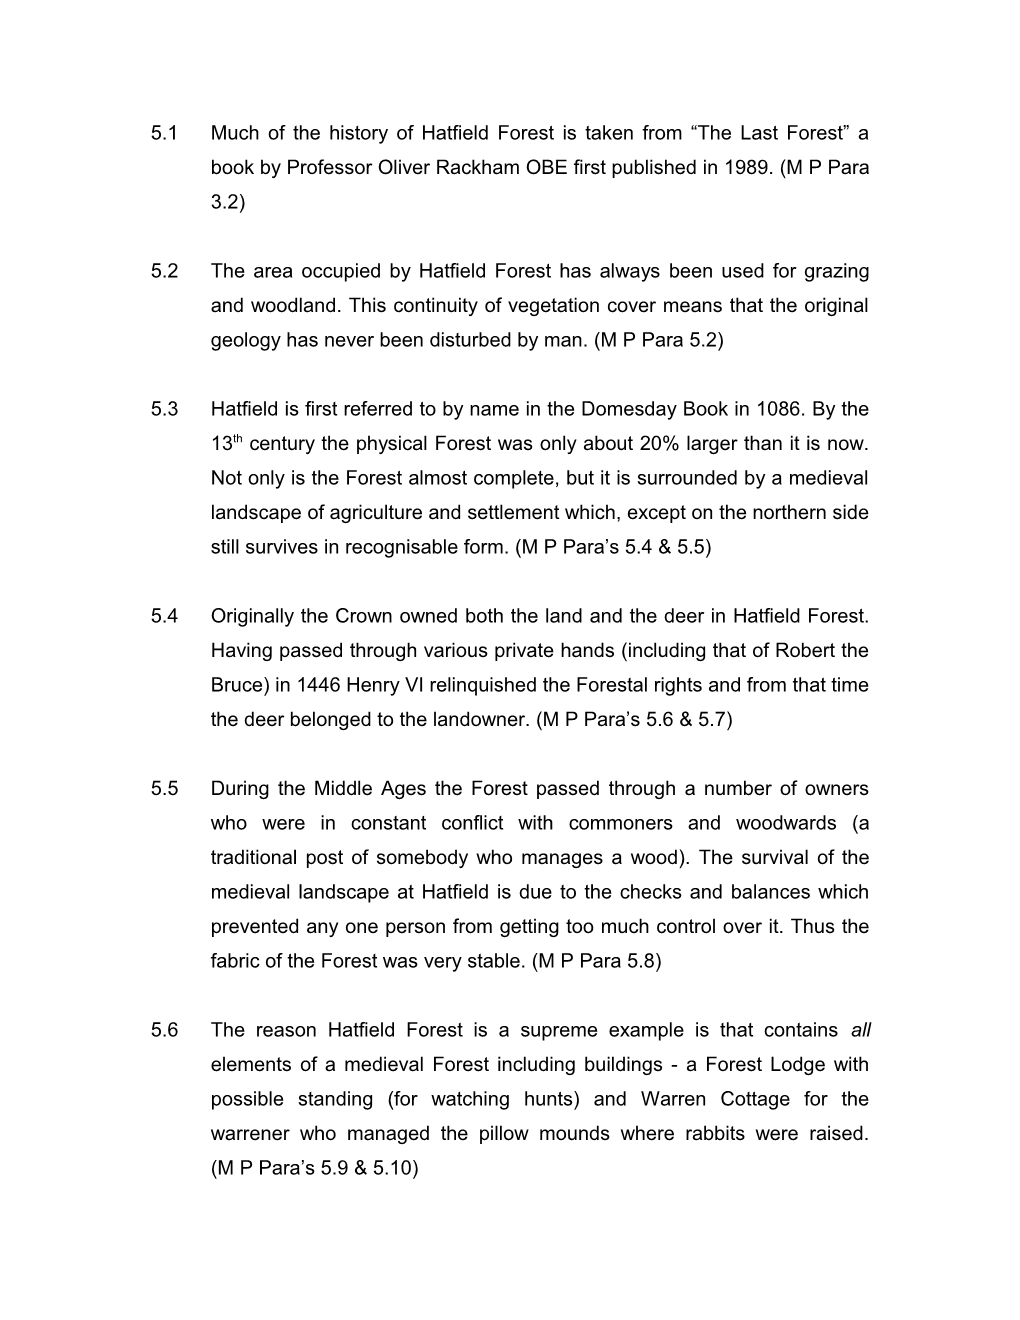 Summary of Proof of Evidence by the National Trust in Respect of Hatfield Forest